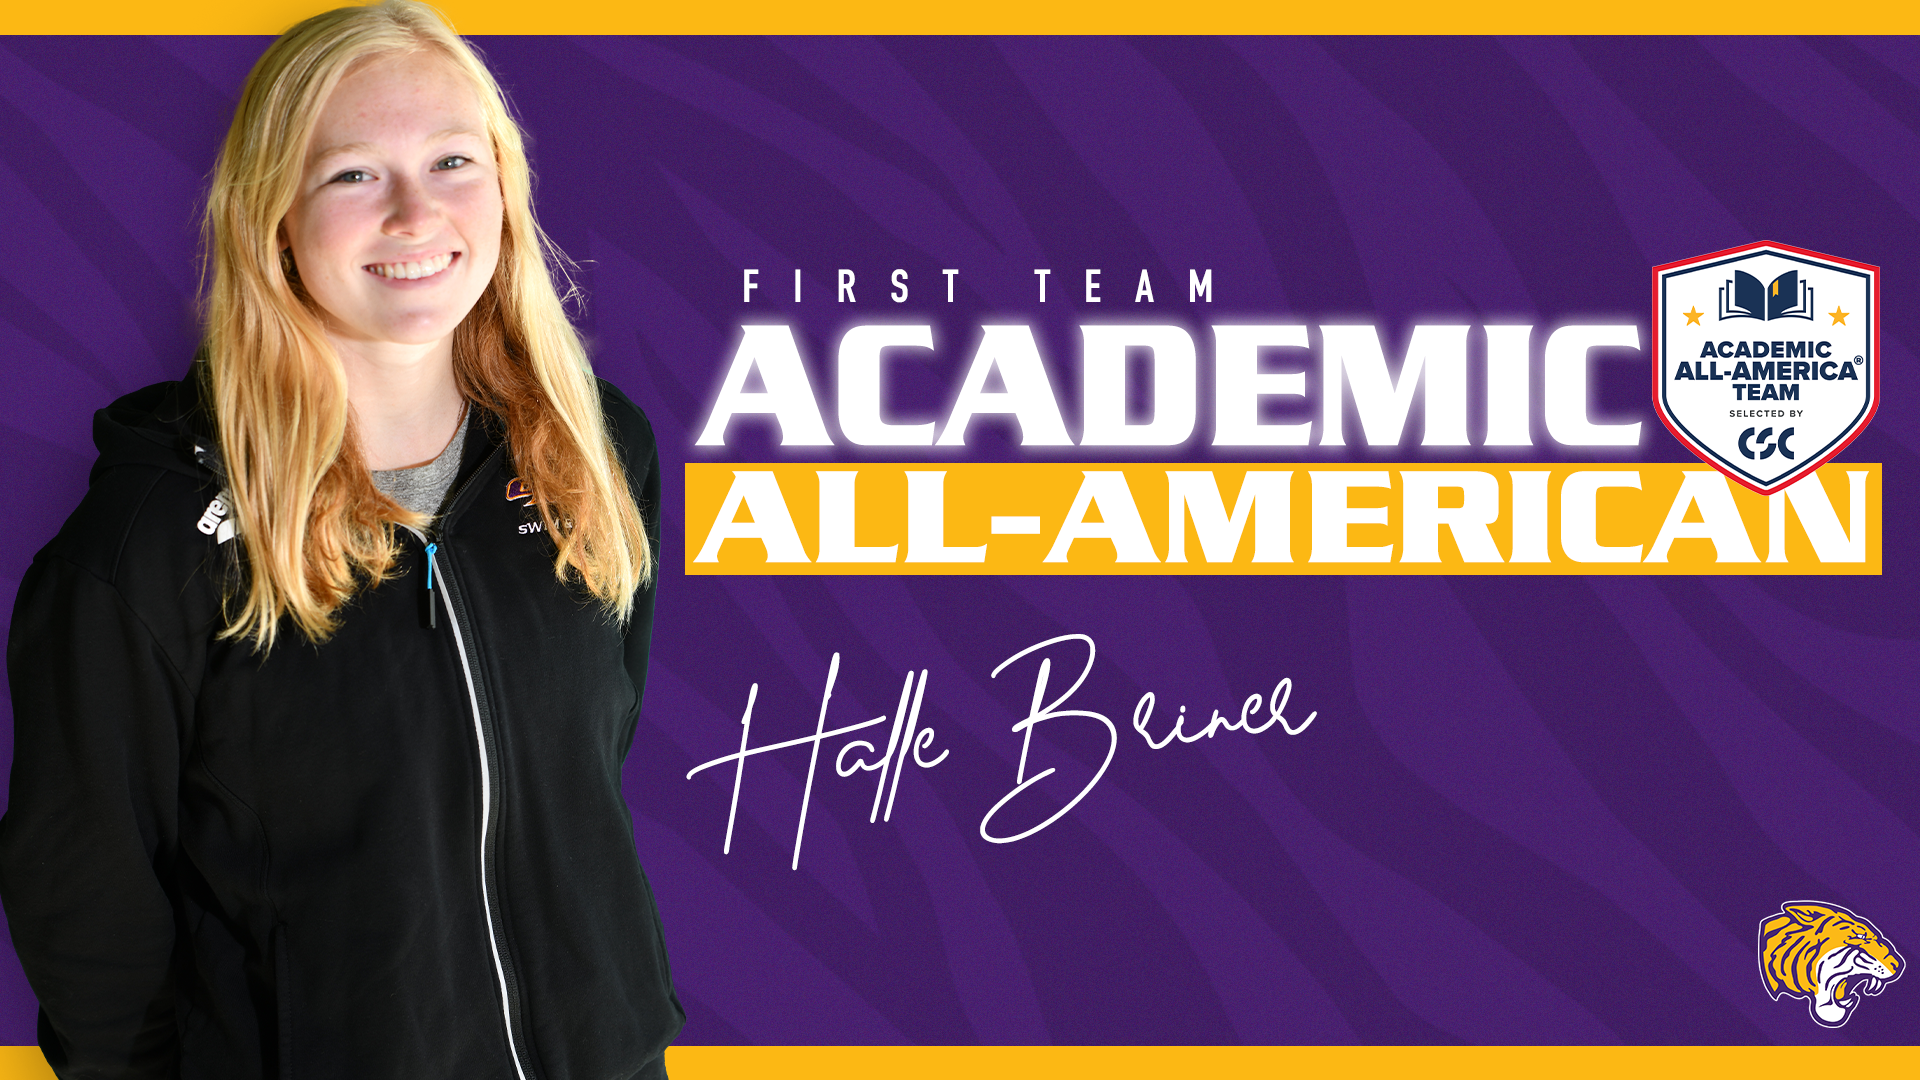 BRINER NAMED CSC FIRST-TEAM ACADEMIC ALL-AMERICAN